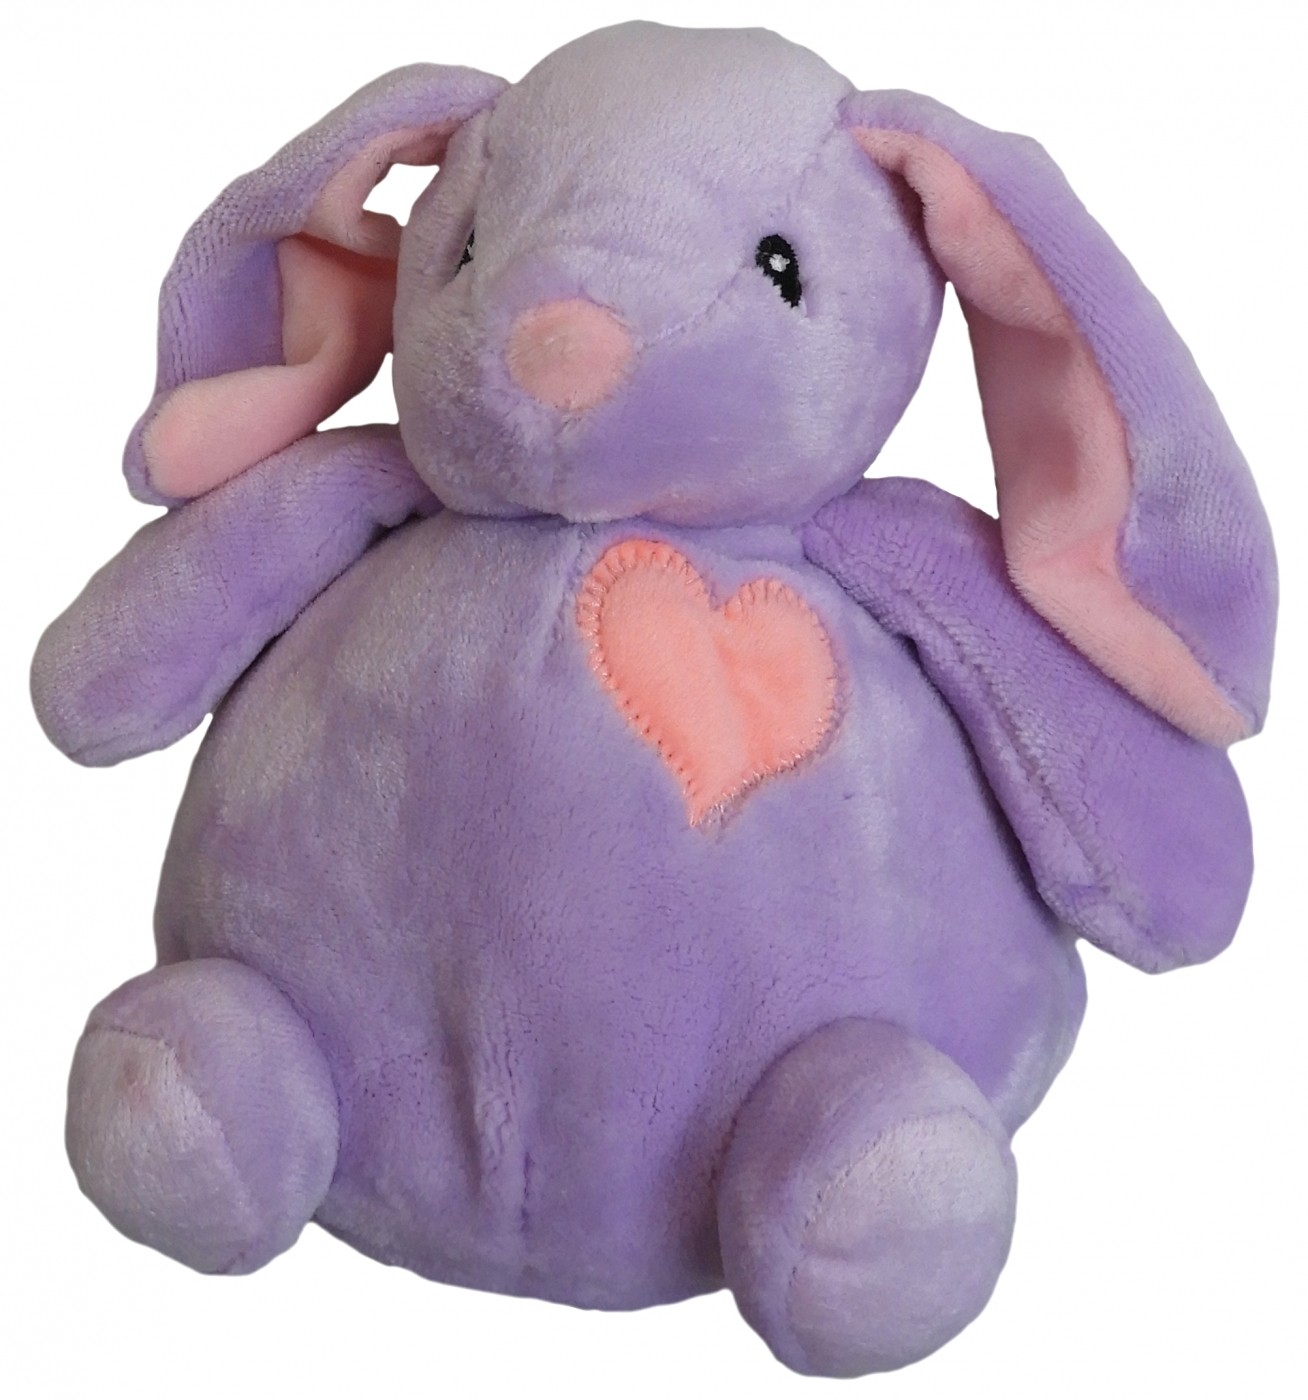 Peluche per cani Rabbit Soothers - 30cm - Antistress